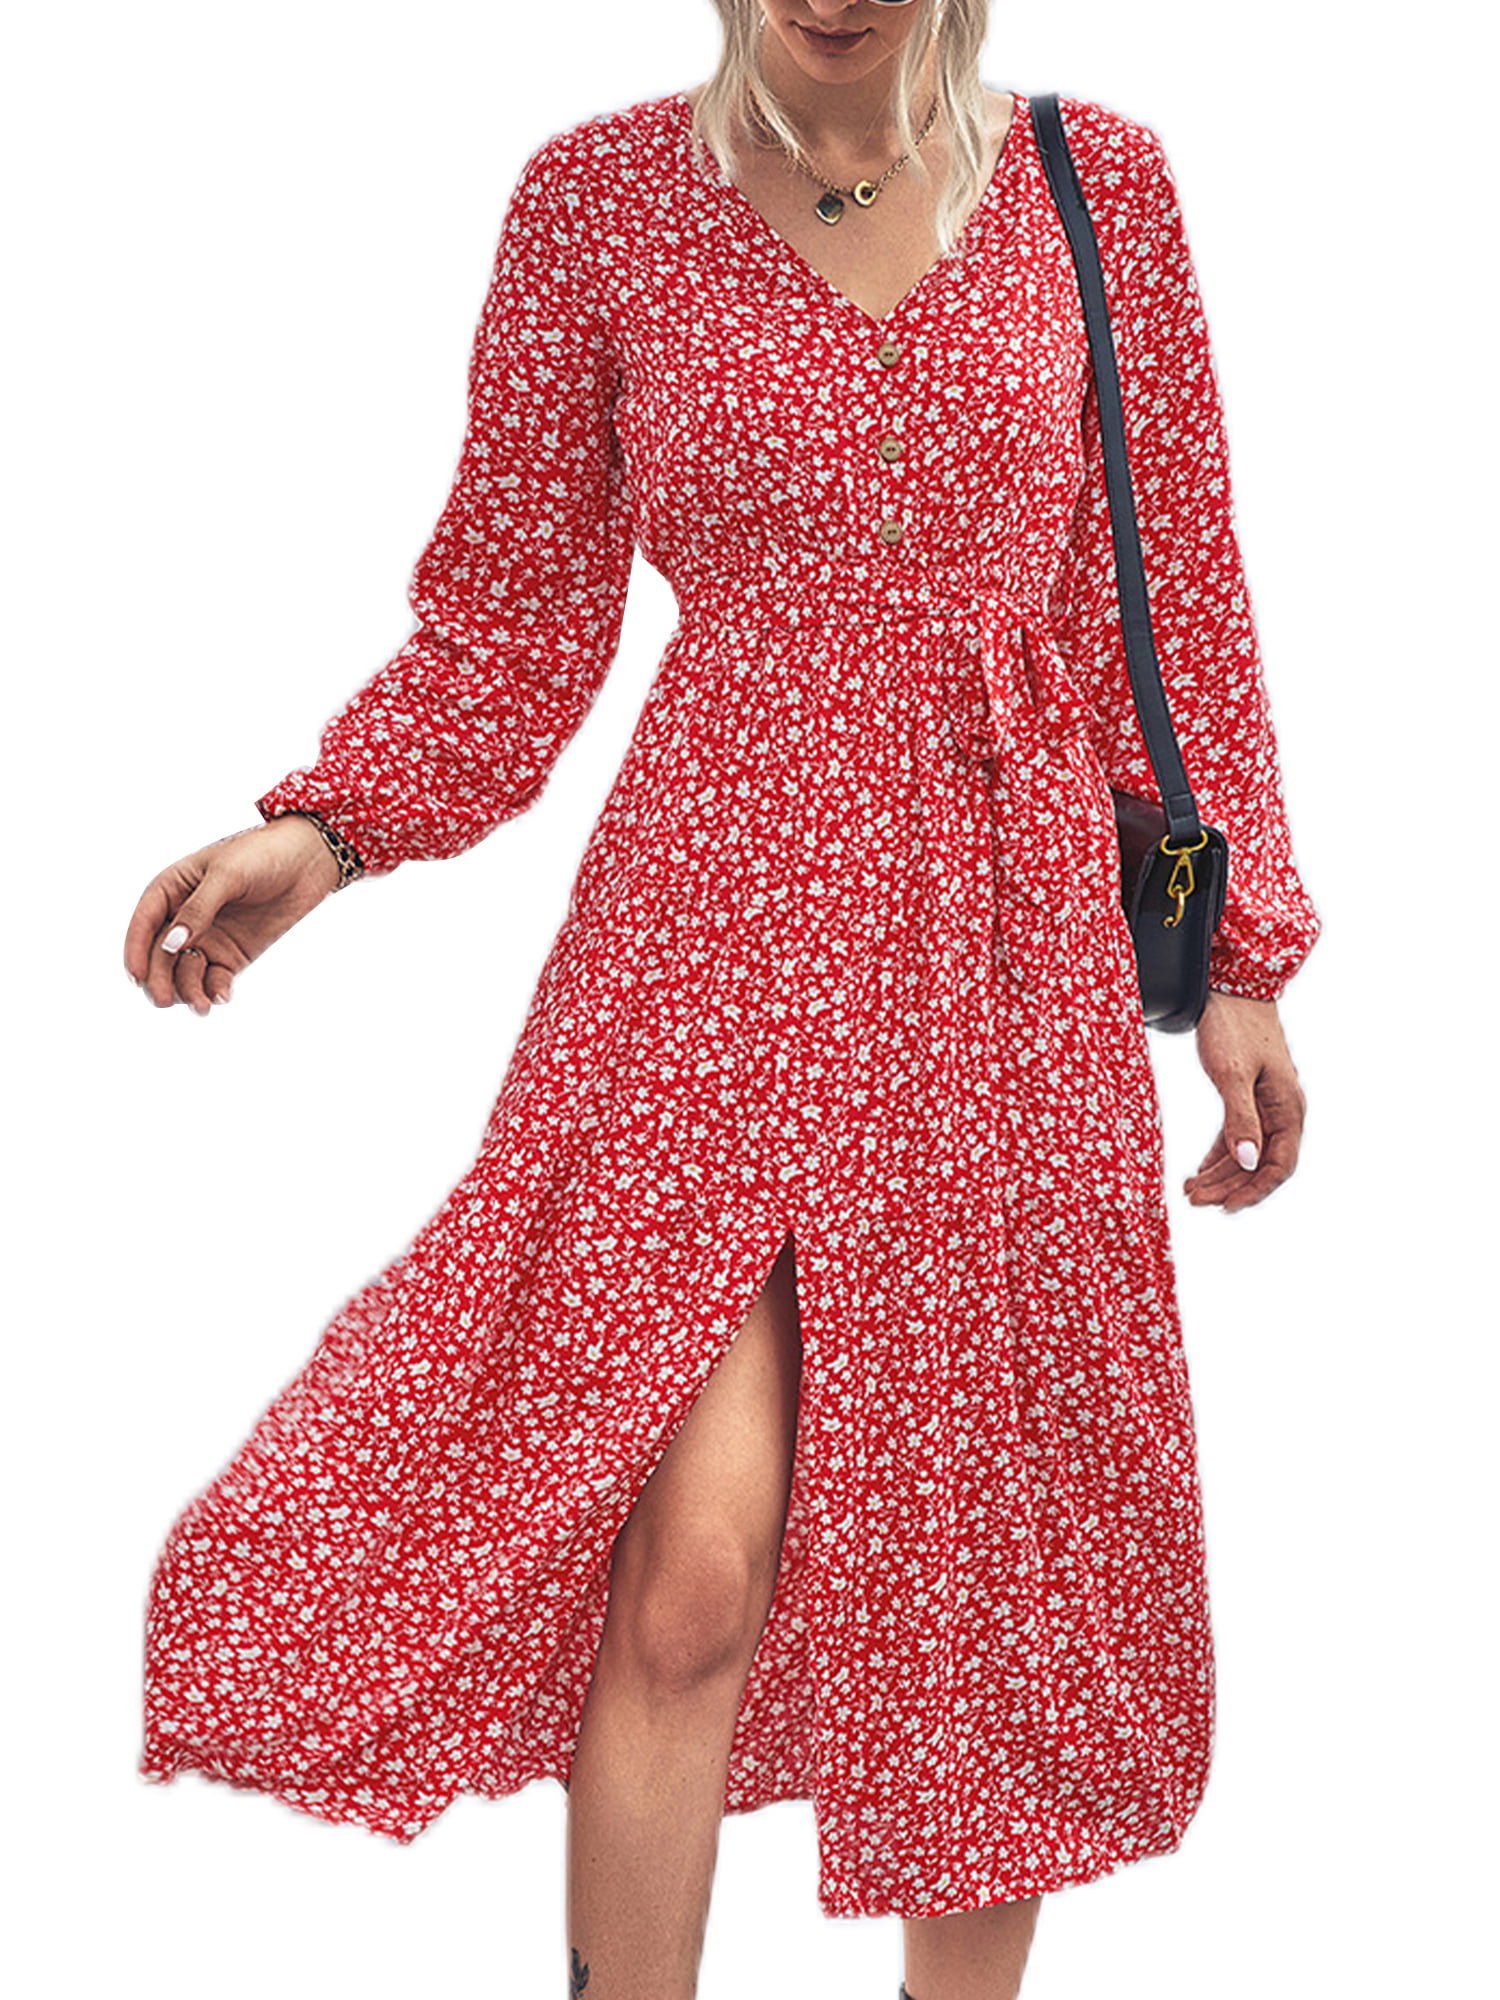 Midi Dress with Long Sleeves Casual Autumn Swing Midi Dresses for Women Dress 